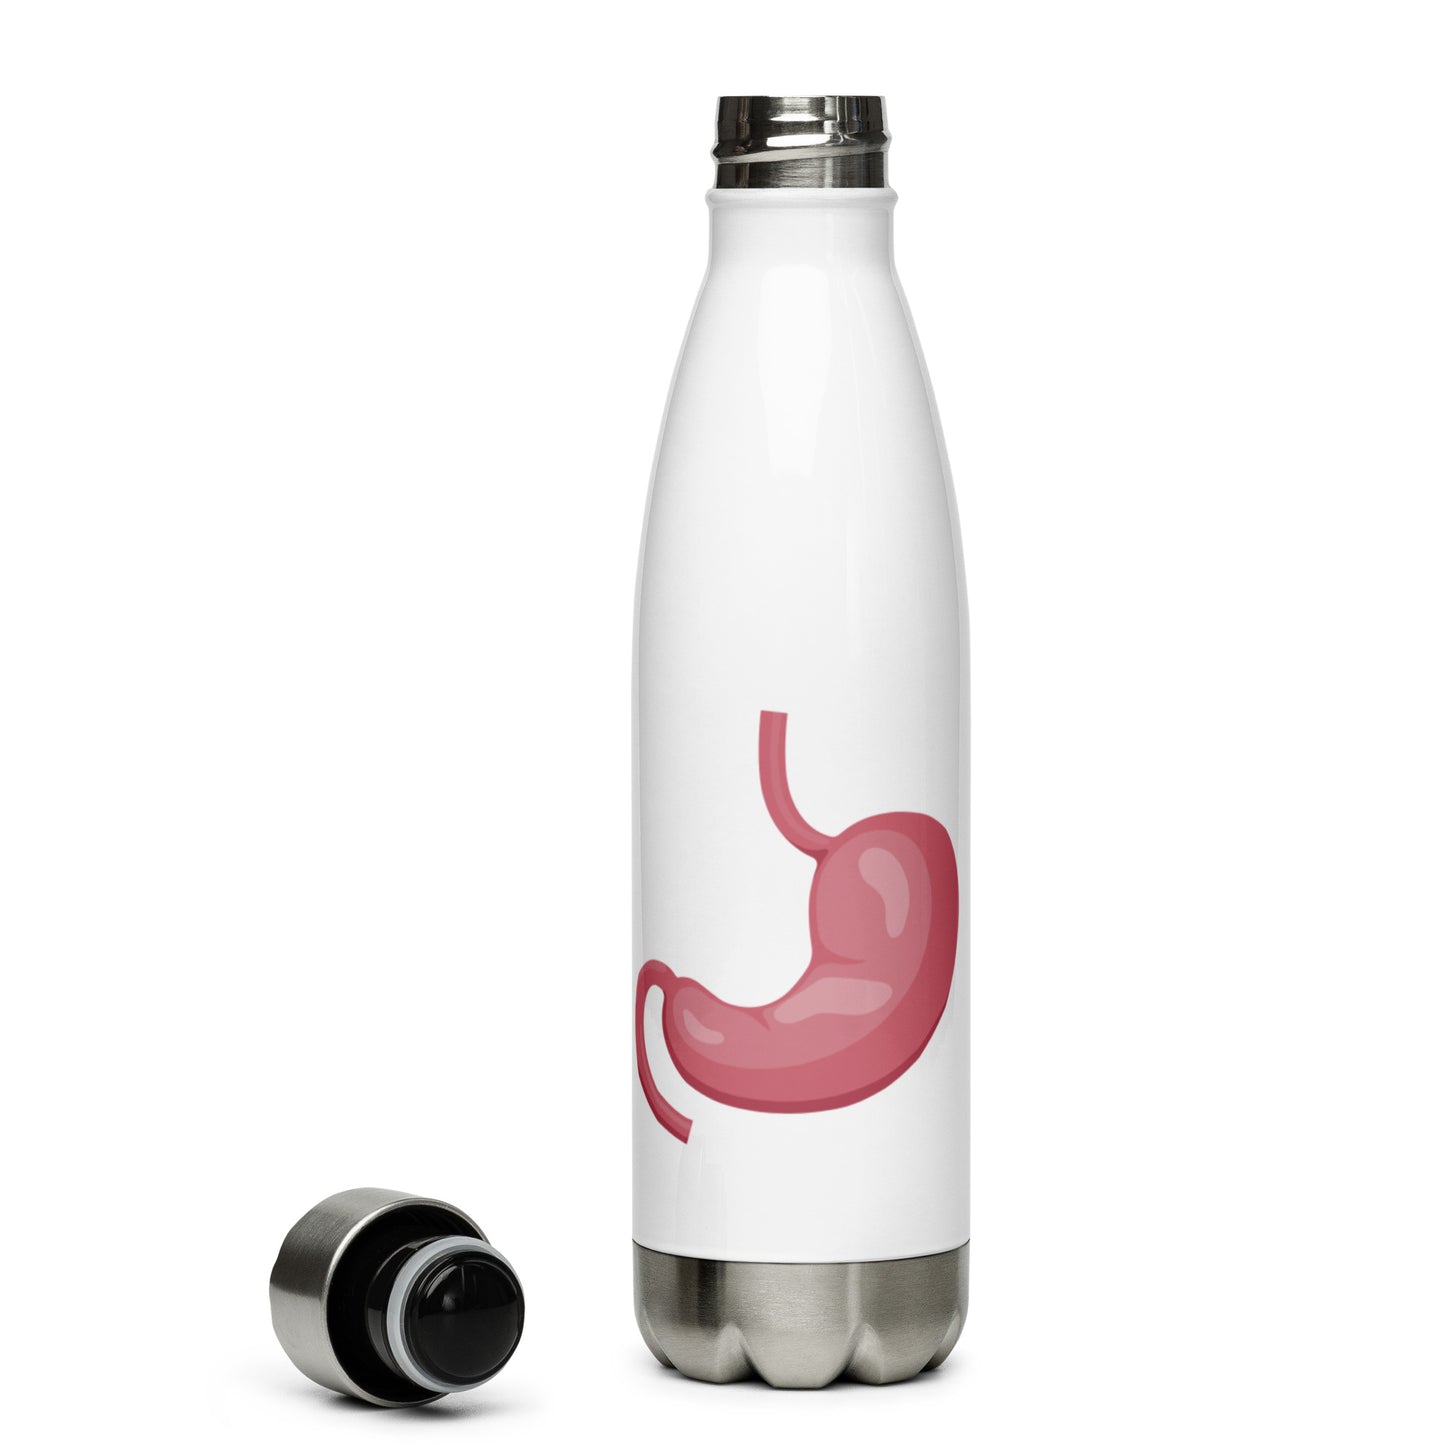 Stainless Steel Water Bottle: Stomach